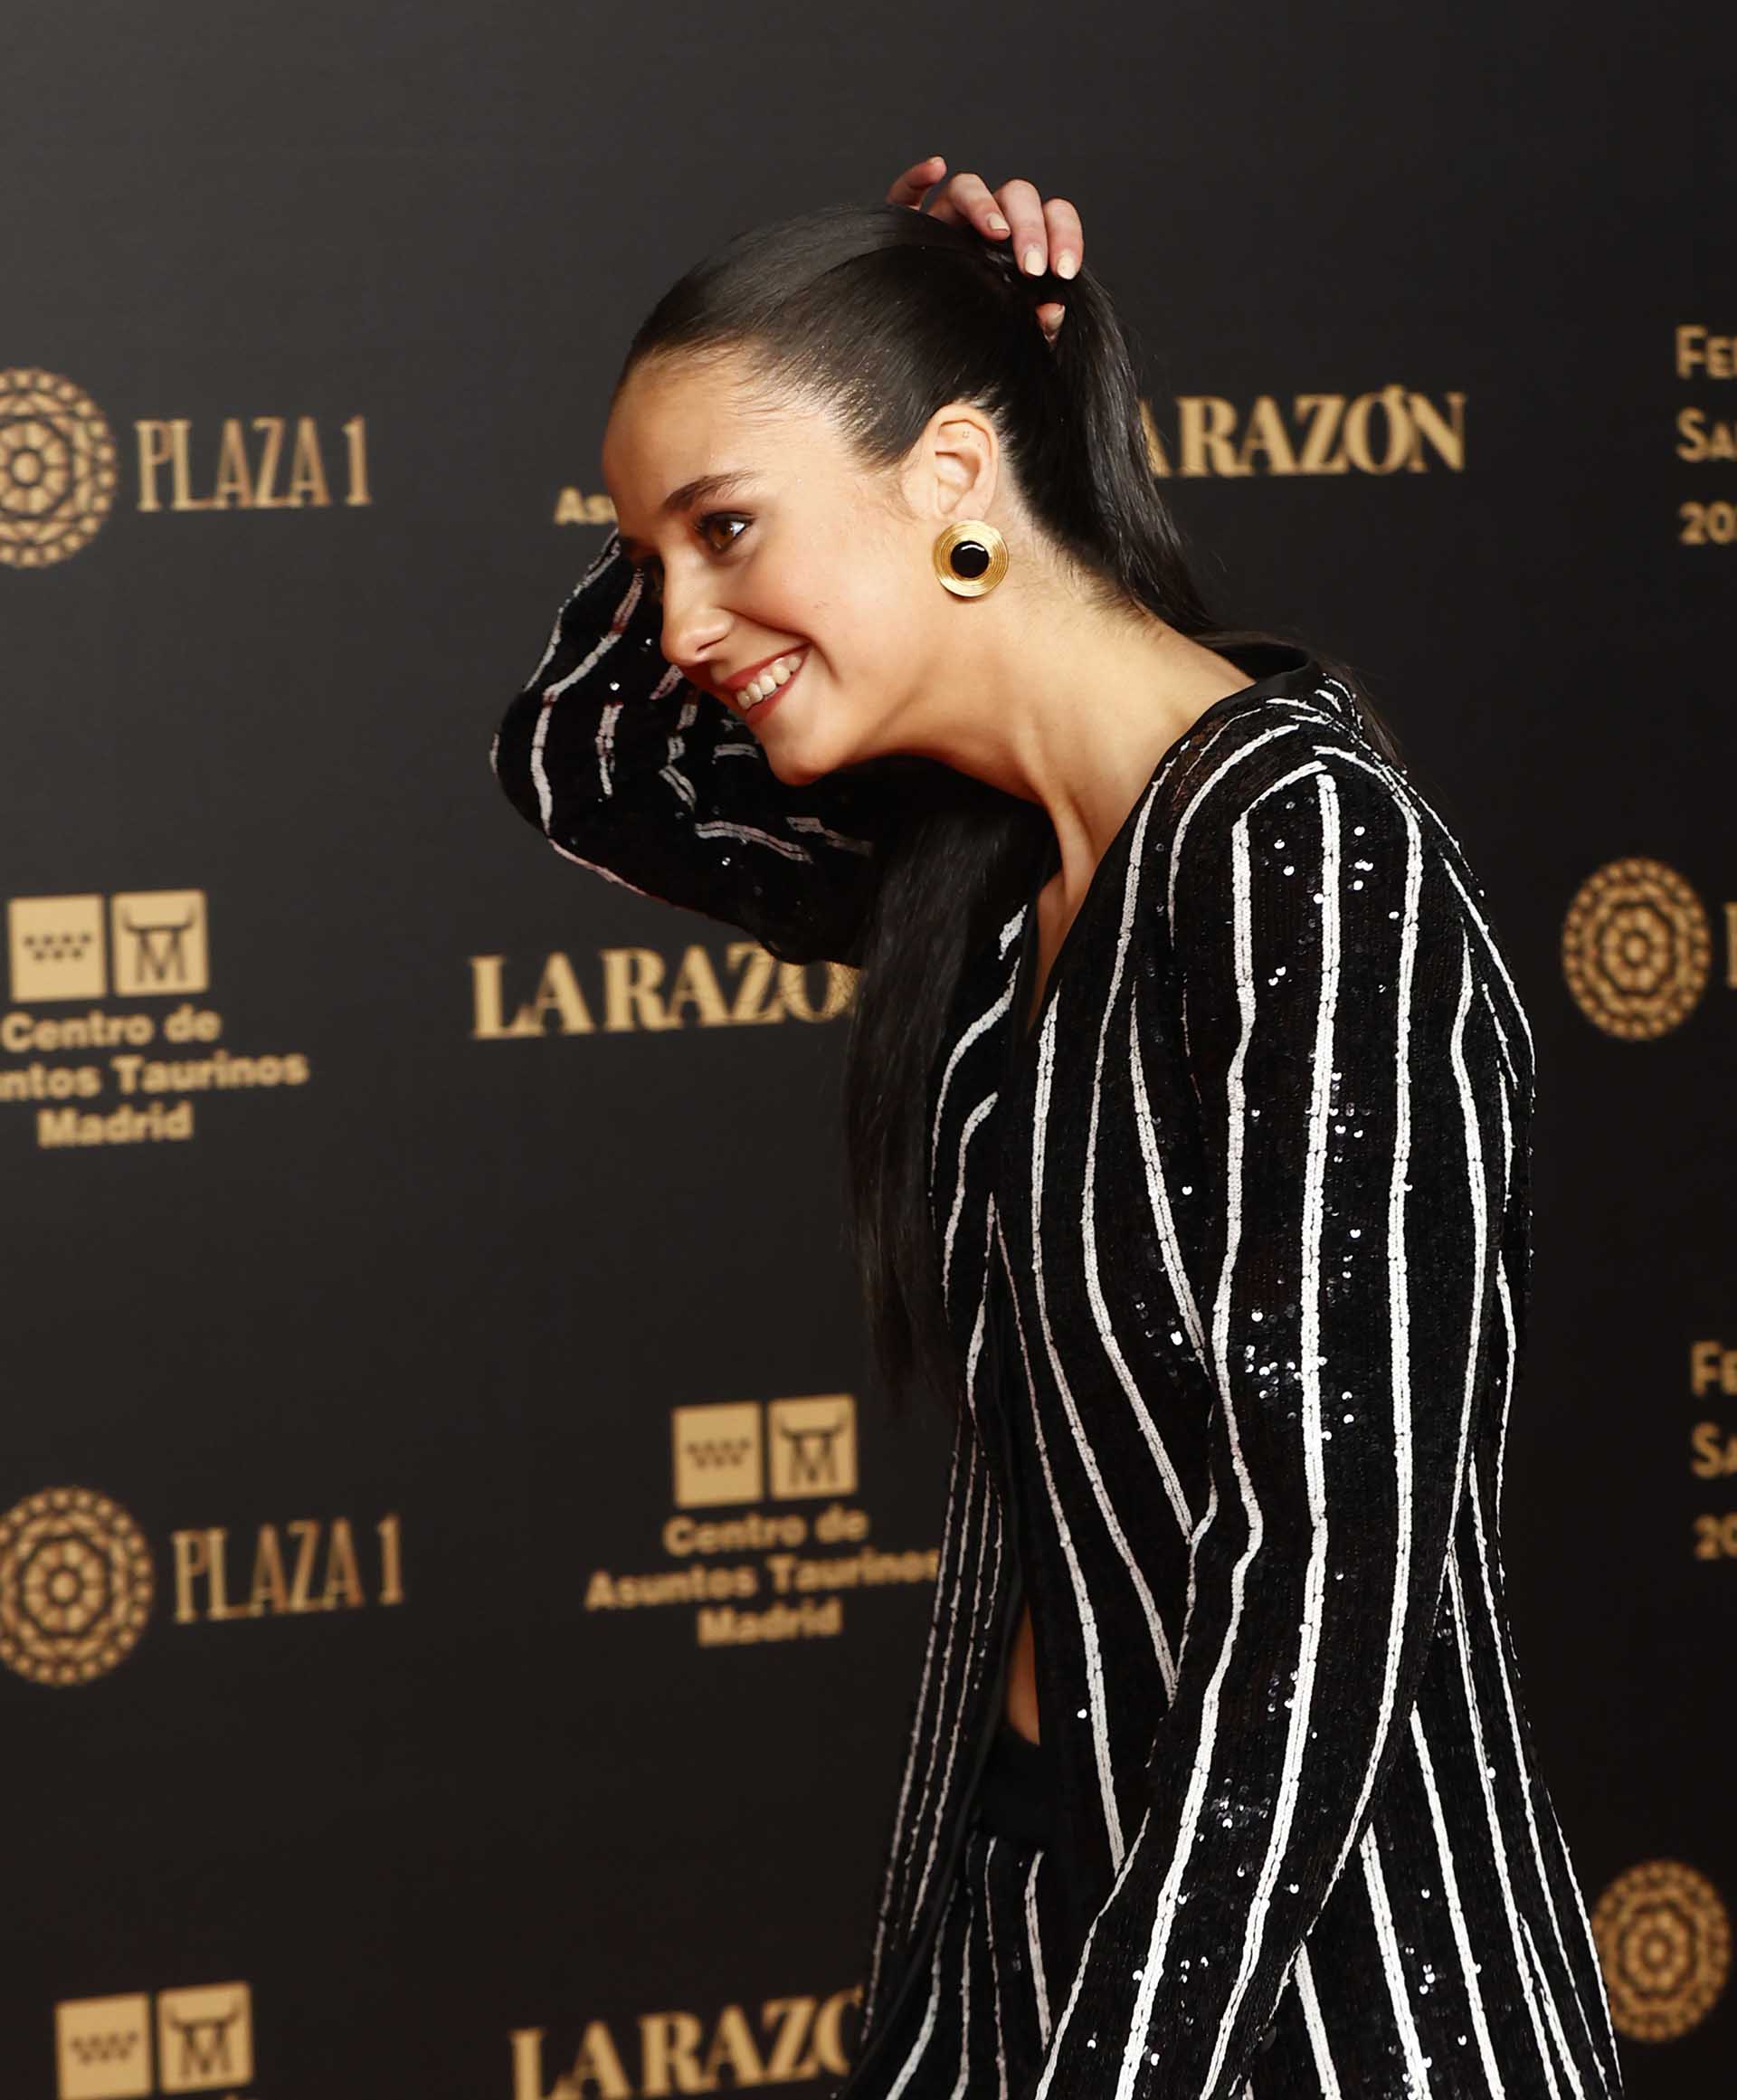 Victoria Federica de Marichalar during the Gala of presentation of the Cartels of the"Feria de San Isidro 2022 in Madrid on Monday, March 14, 2022.